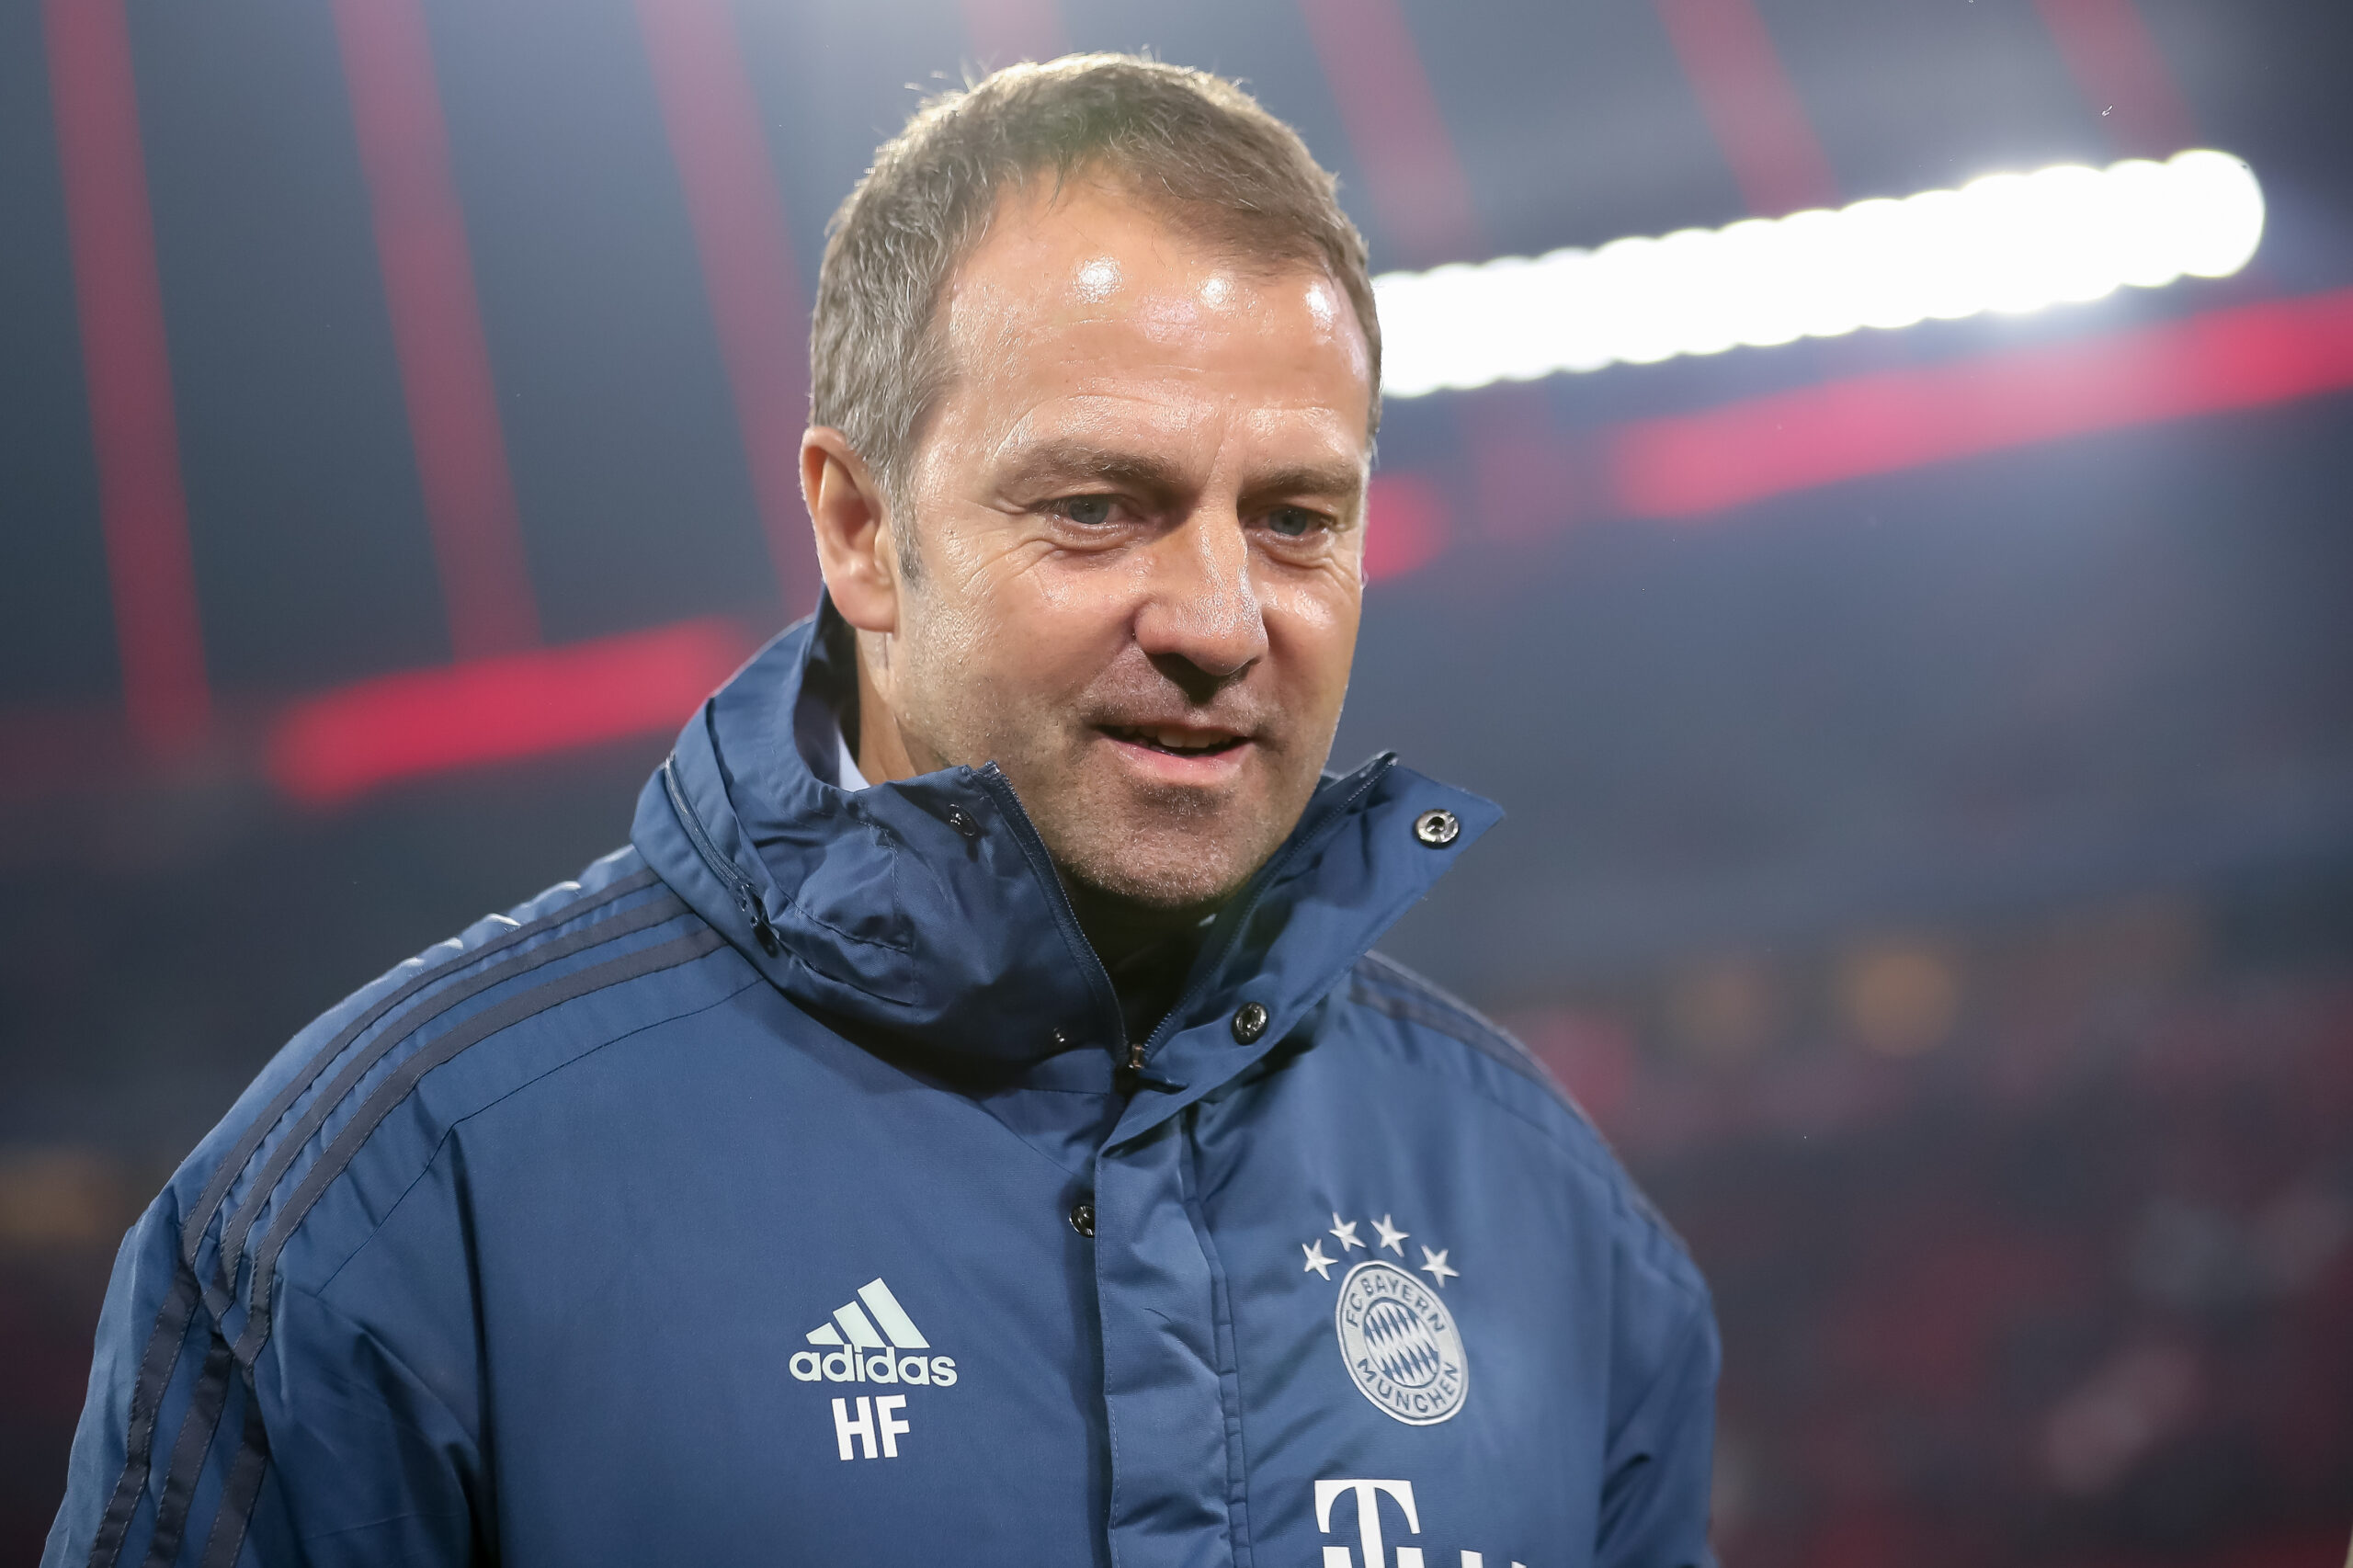 MUNICH, GERMANY - JANUARY 25: Hansi Flick, Head Coach of FC Bayern Muenchen looks on prior to the Bundesliga match between FC Bayern Muenchen and FC Schalke 04 at Allianz Arena on January 25, 2020 in Munich, Germany.